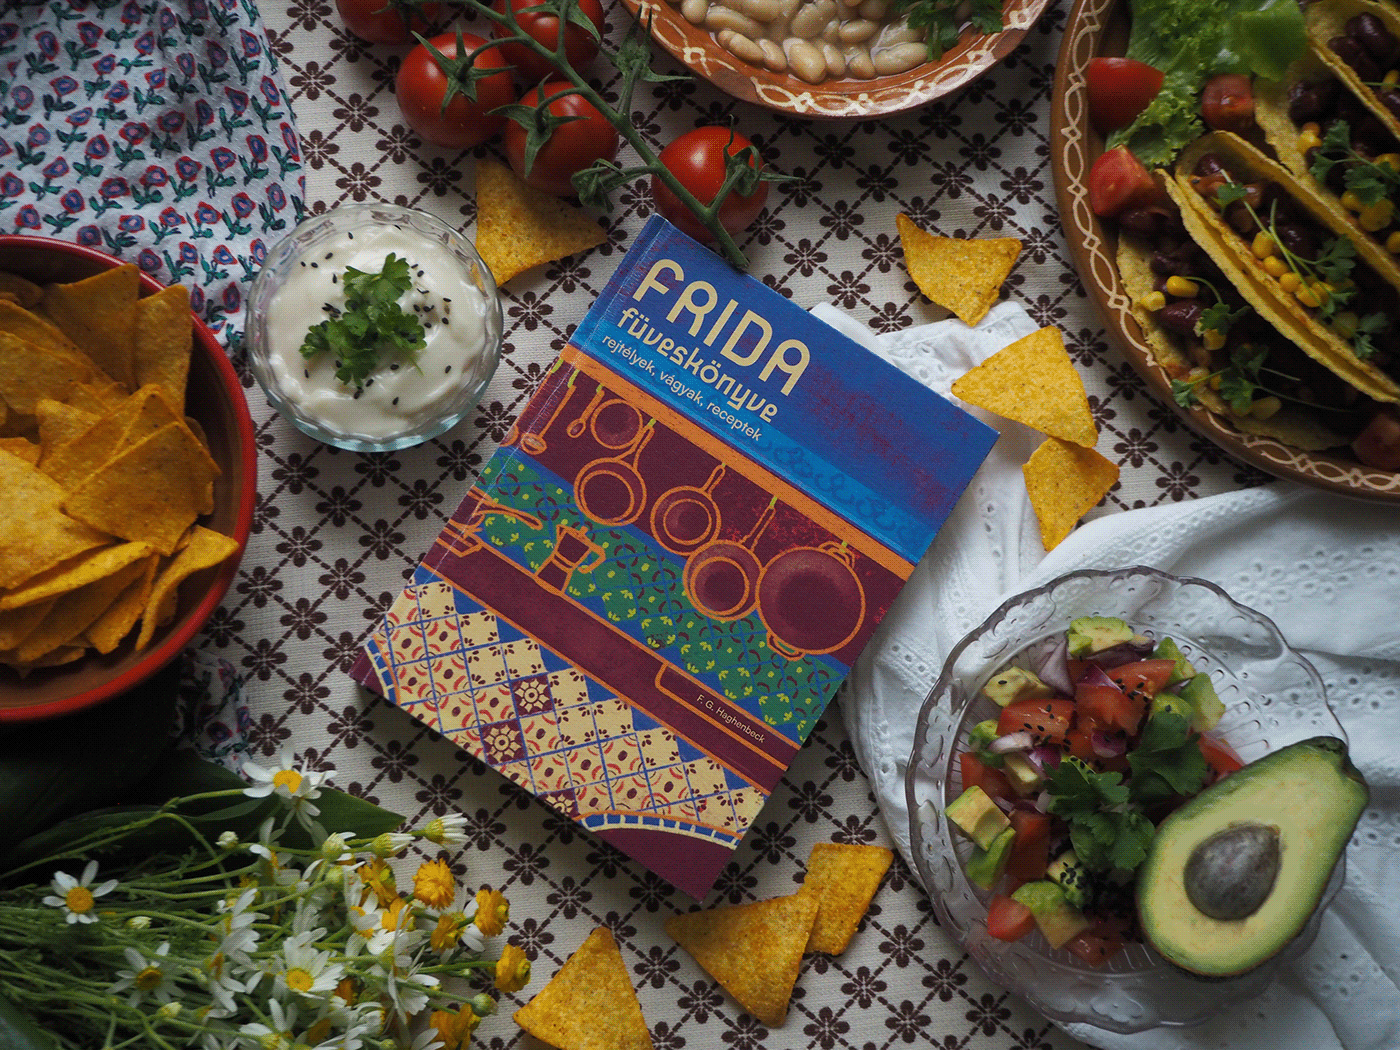 Frida Kahlo mexico book graphicdesign colorful food photography foodillustration